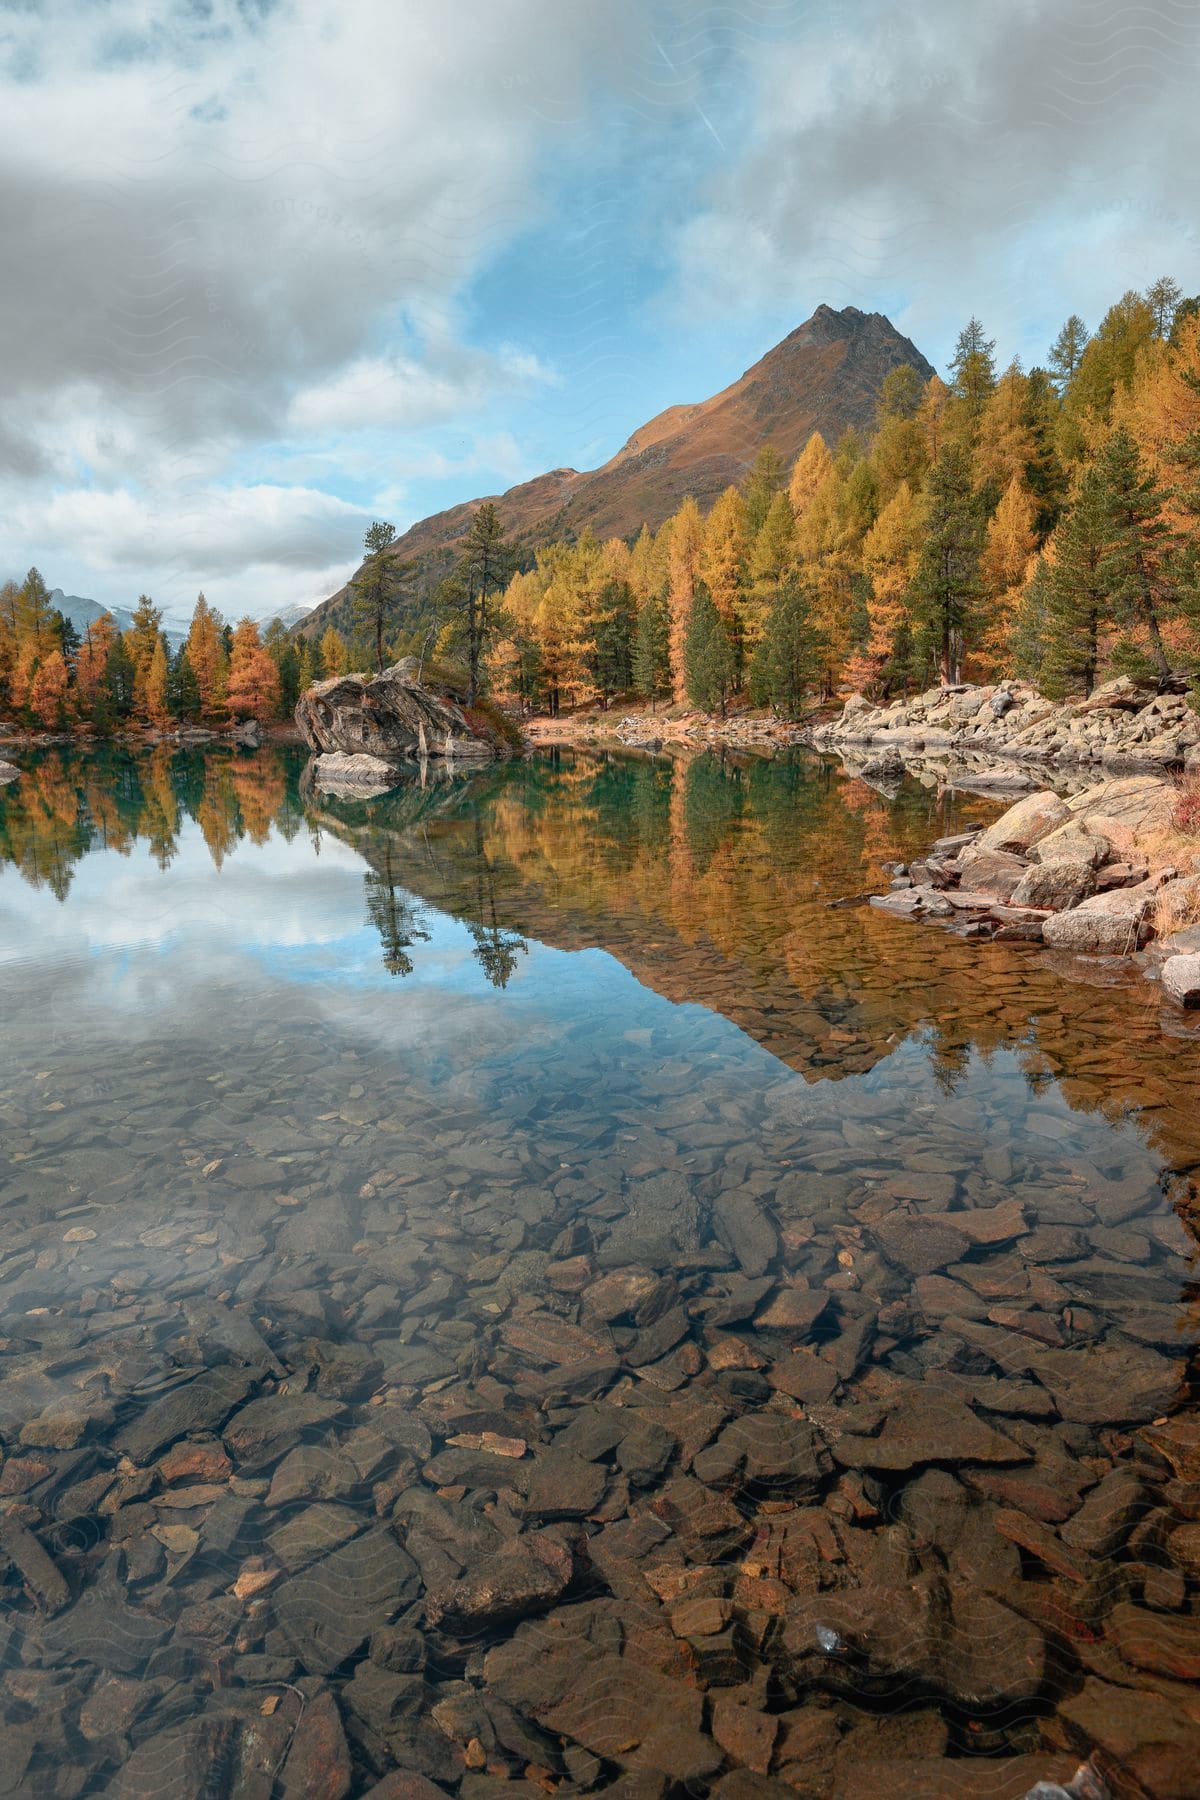 A clearwater lake is surrounded by a forest of trees in fall colors reflecting on the water with mountains in the distance